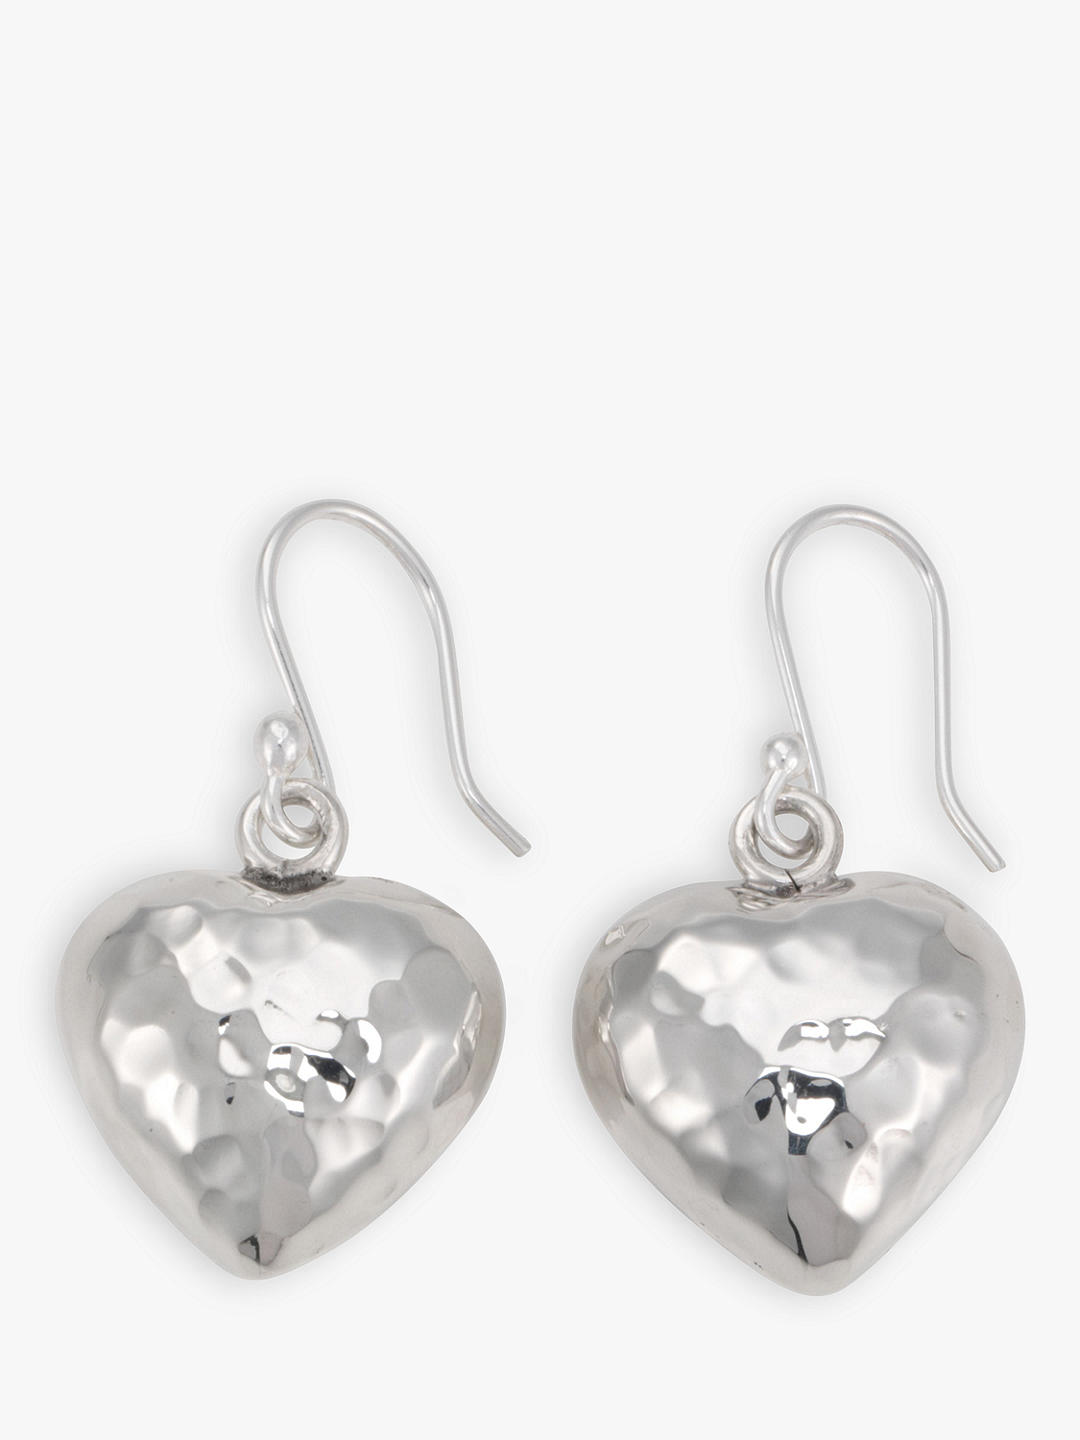 Andea Hammered Puffed Heart Drop Earrings, Silver